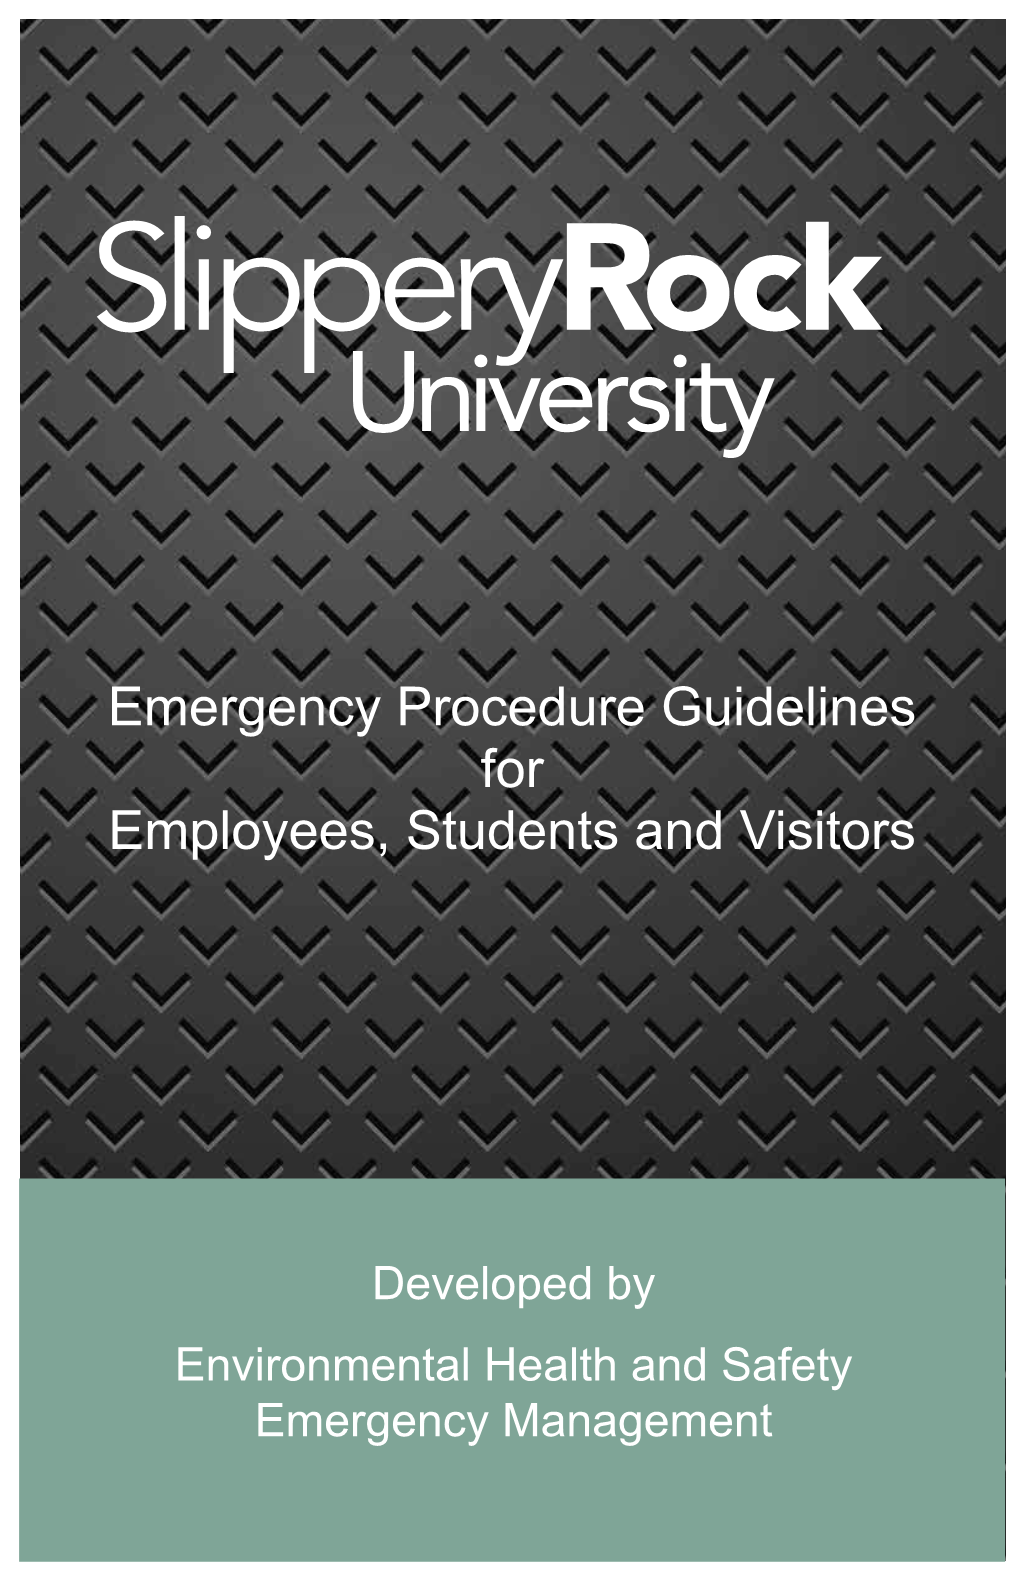 Emergency Procedure Guidelines for Employees, Students and Visitors